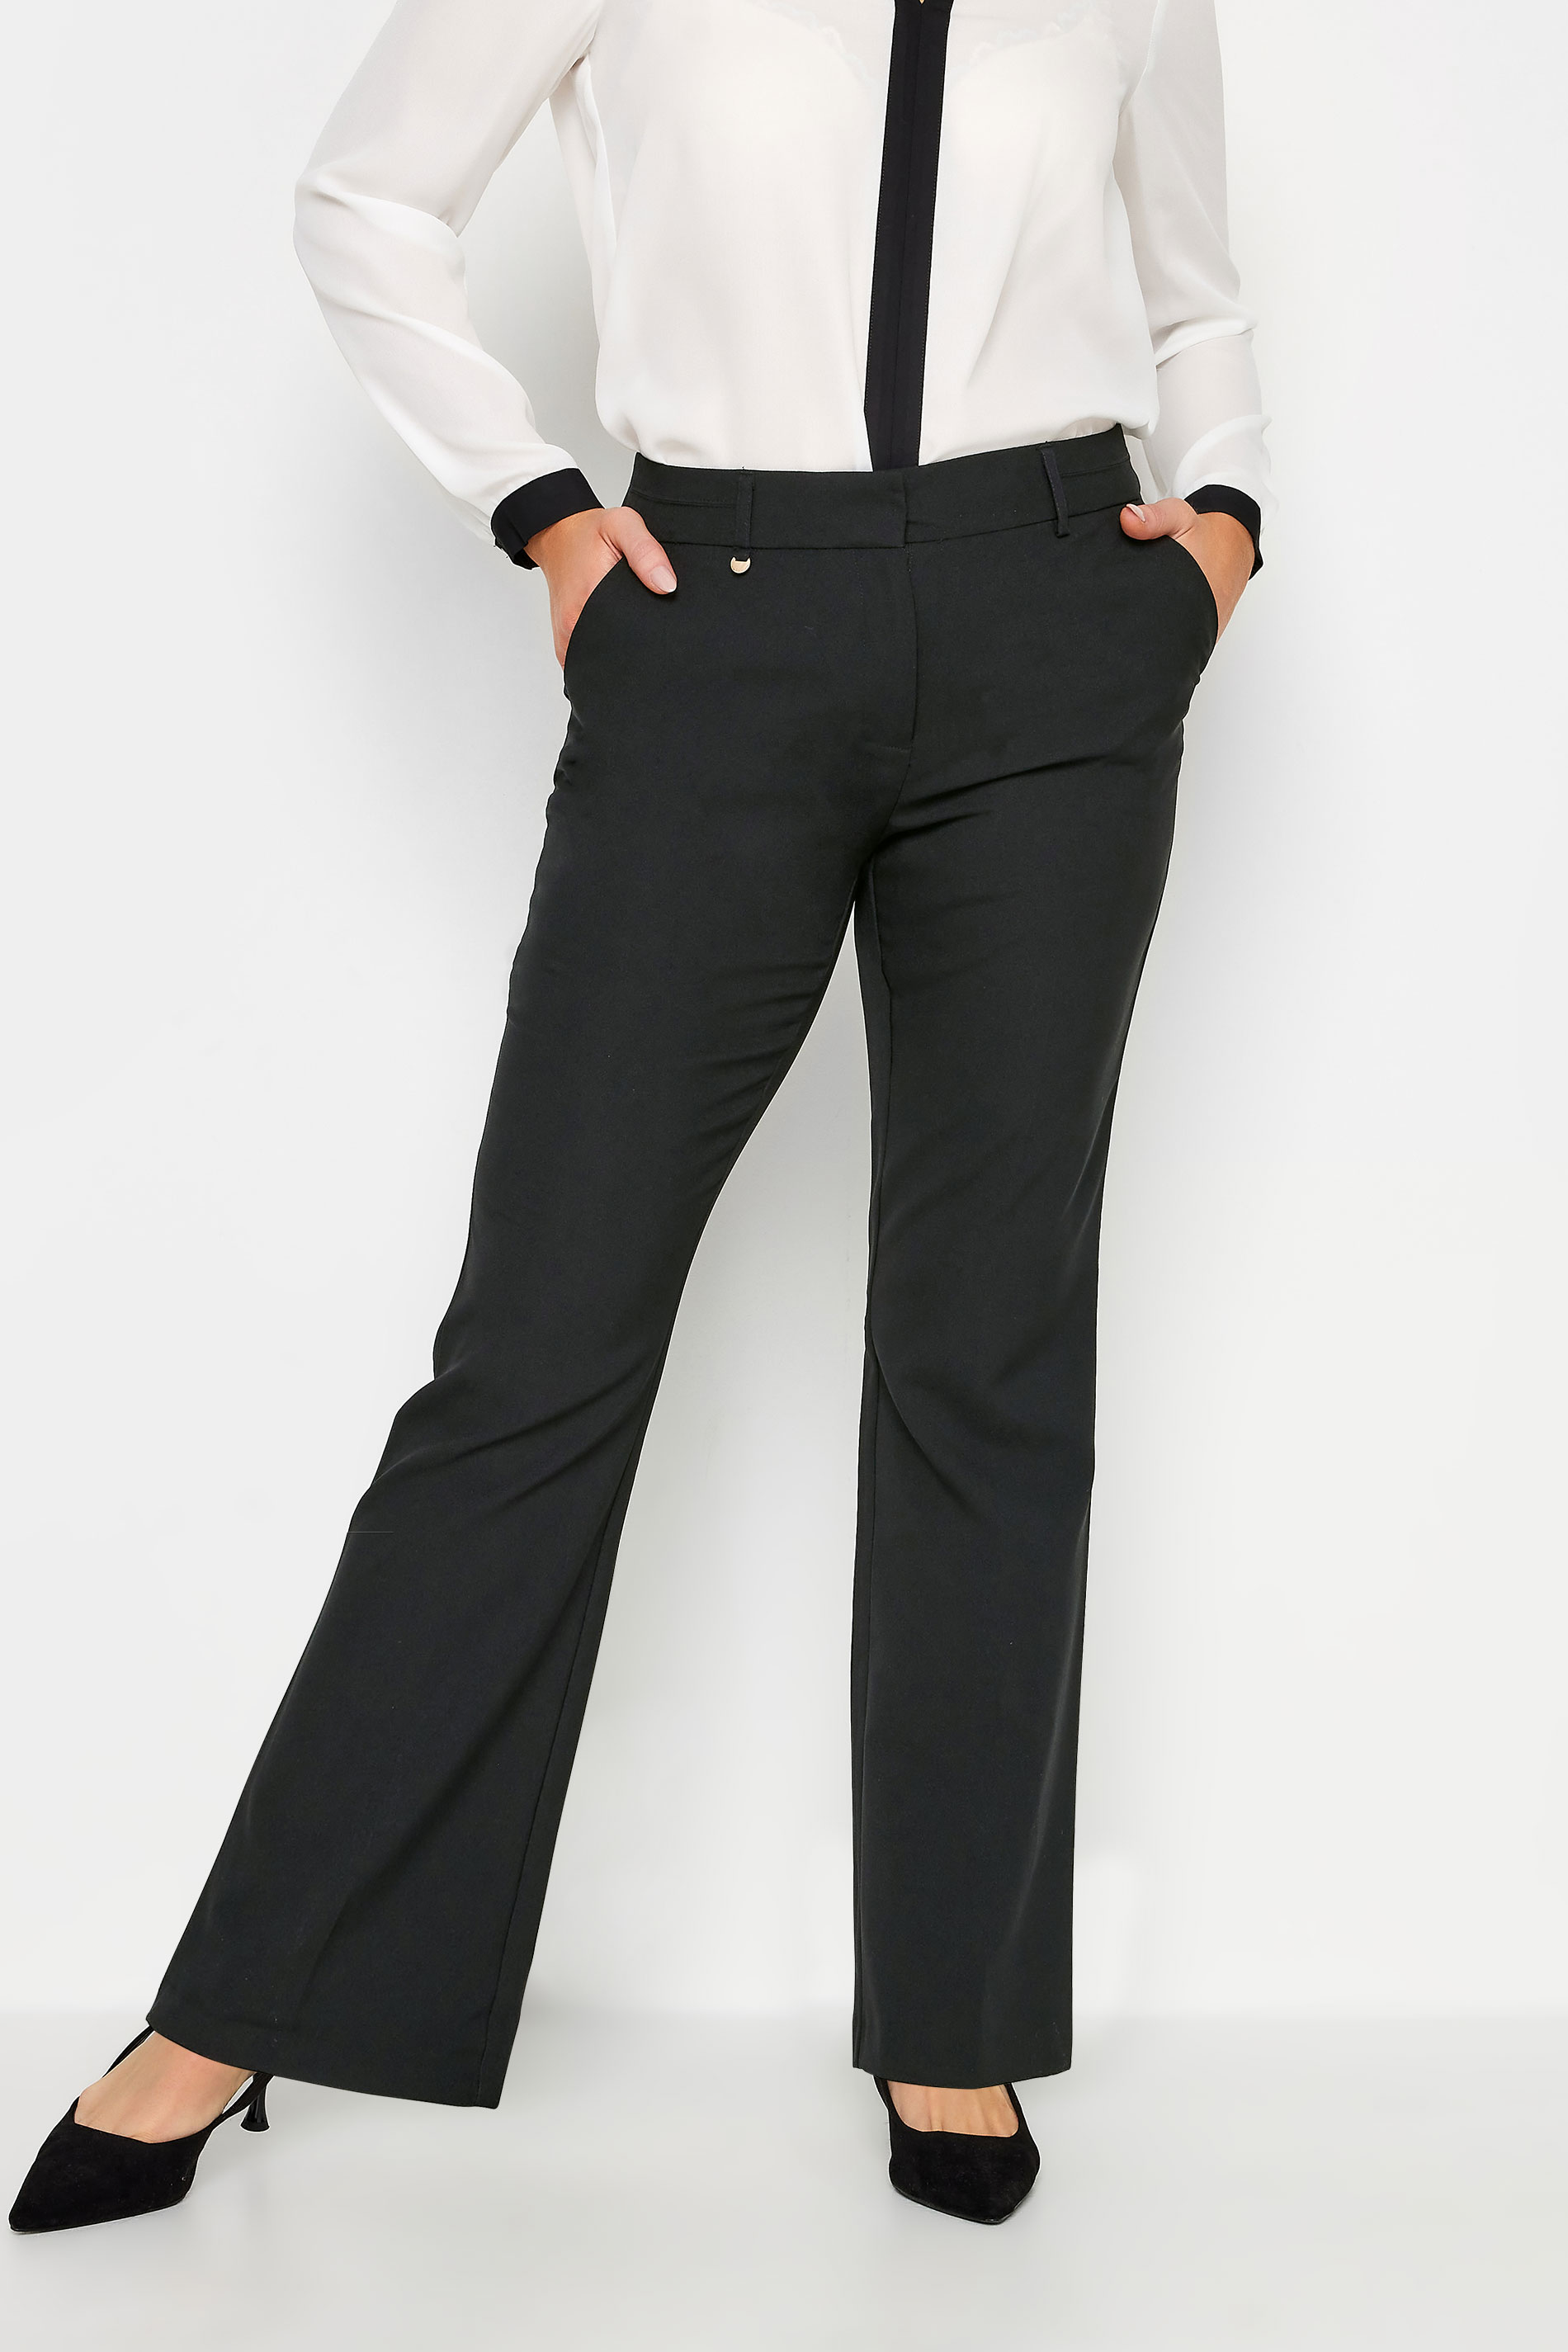 TAILORED BOOTCUT TROUSERS in black